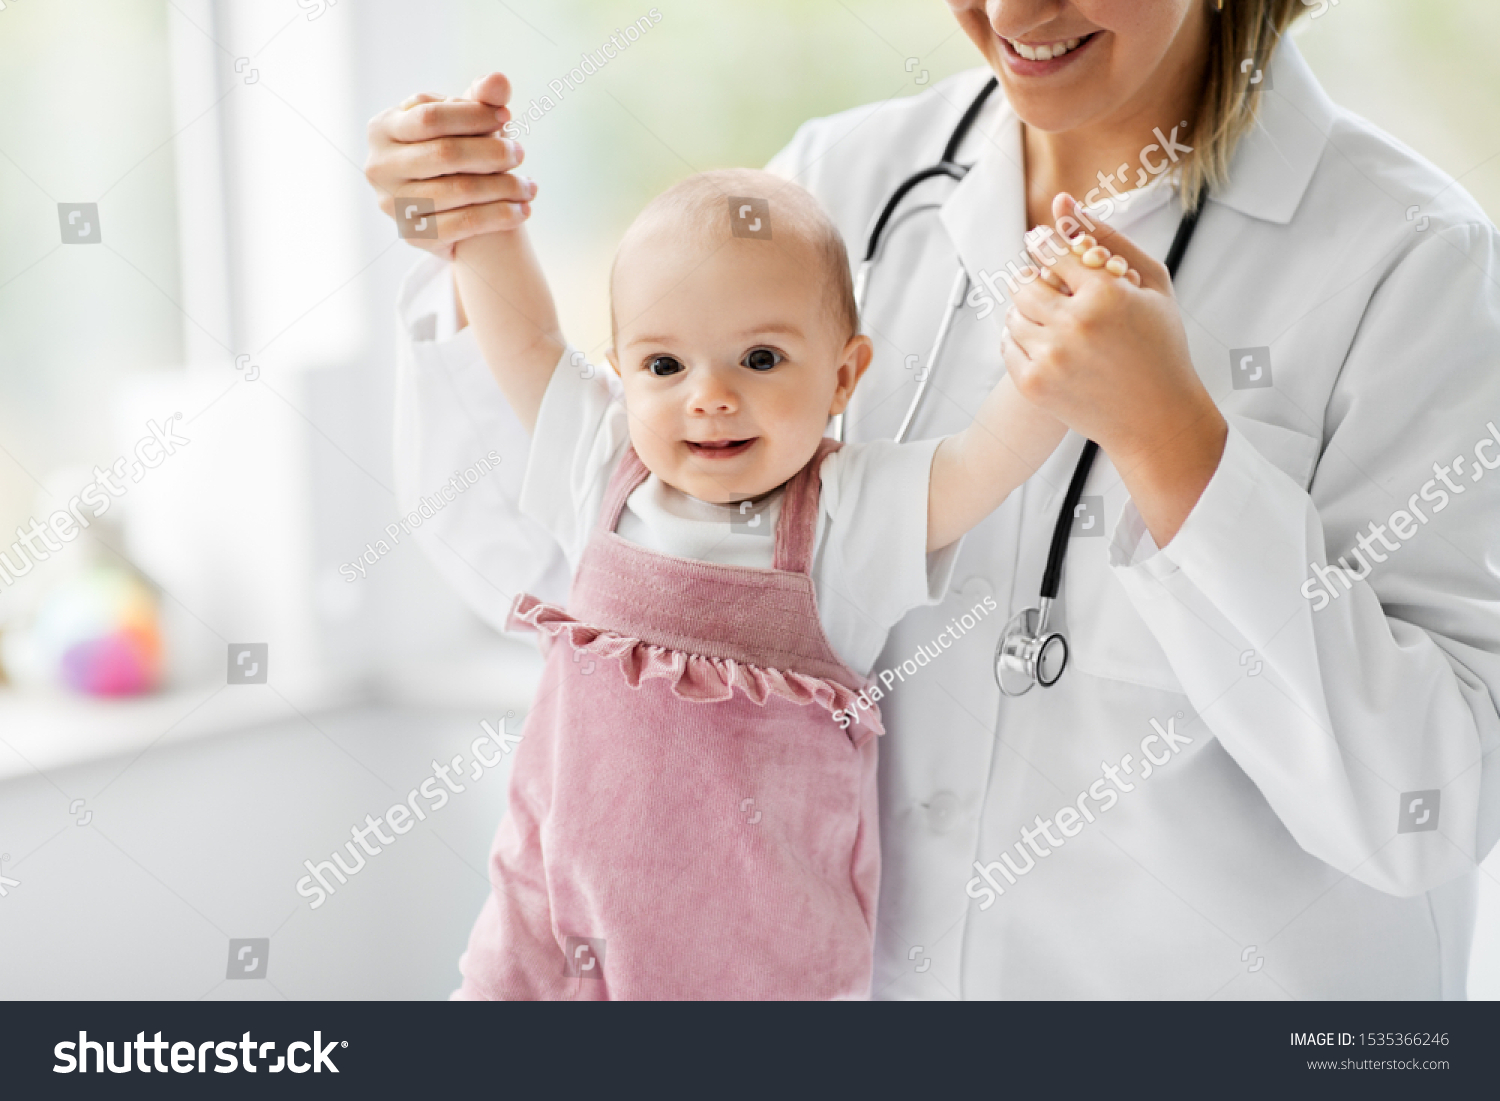 medicine, healthcare and pediatrics concept - female pediatrician or neuropathist doctor or nurse checking smiling baby girl patient's health at clinic or hospital #1535366246